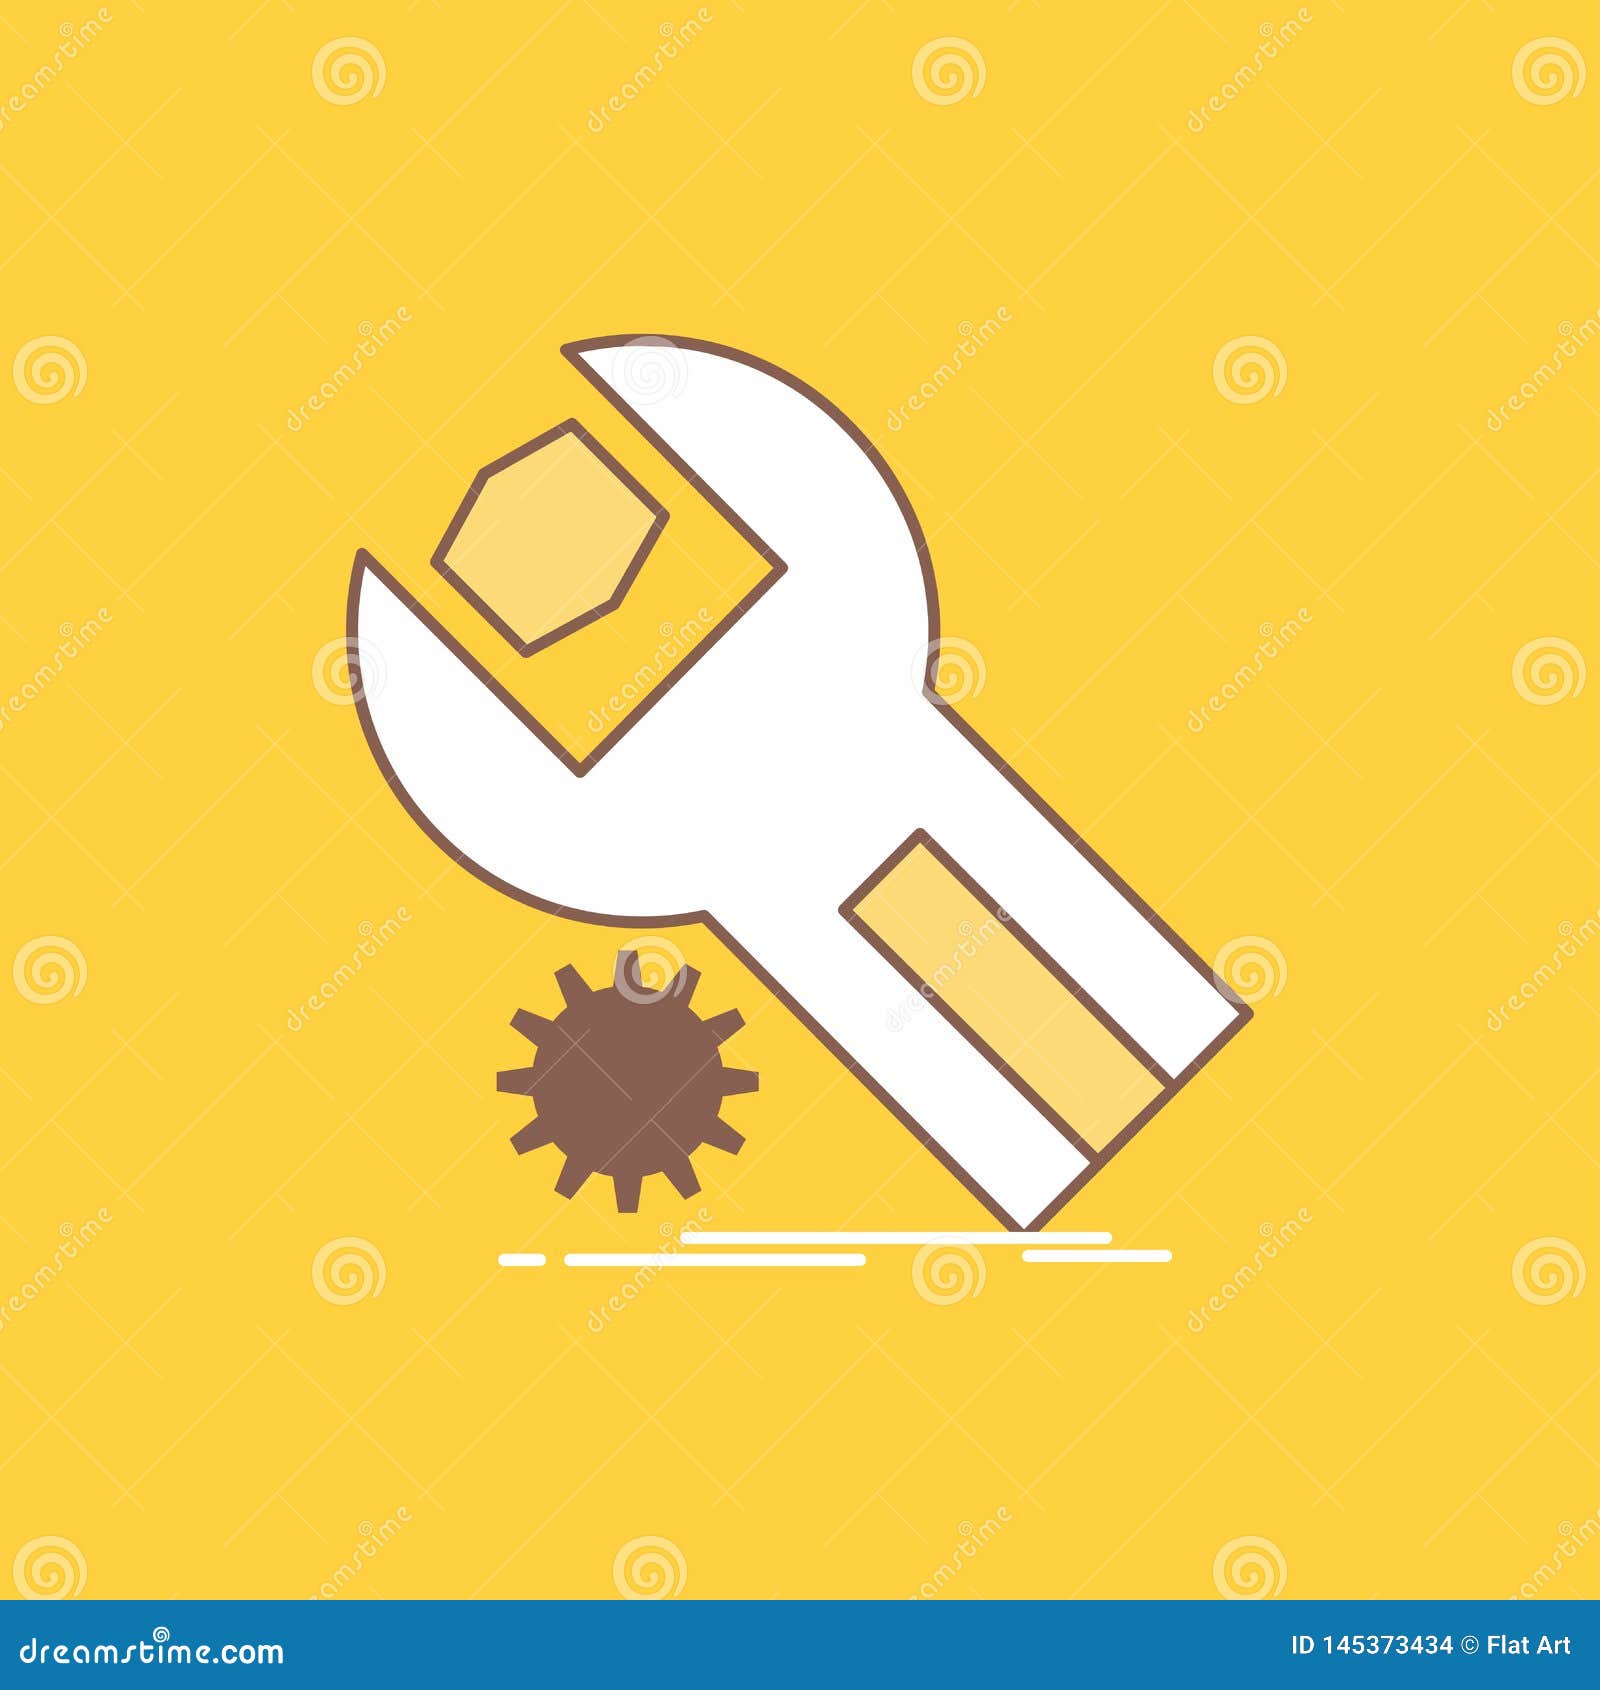 Settings App Installation Maintenance Service Flat Line Filled Icon Beautiful Logo Button Over Yellow Background For Ui And Vektor Abbildung Illustration Von Filled Service